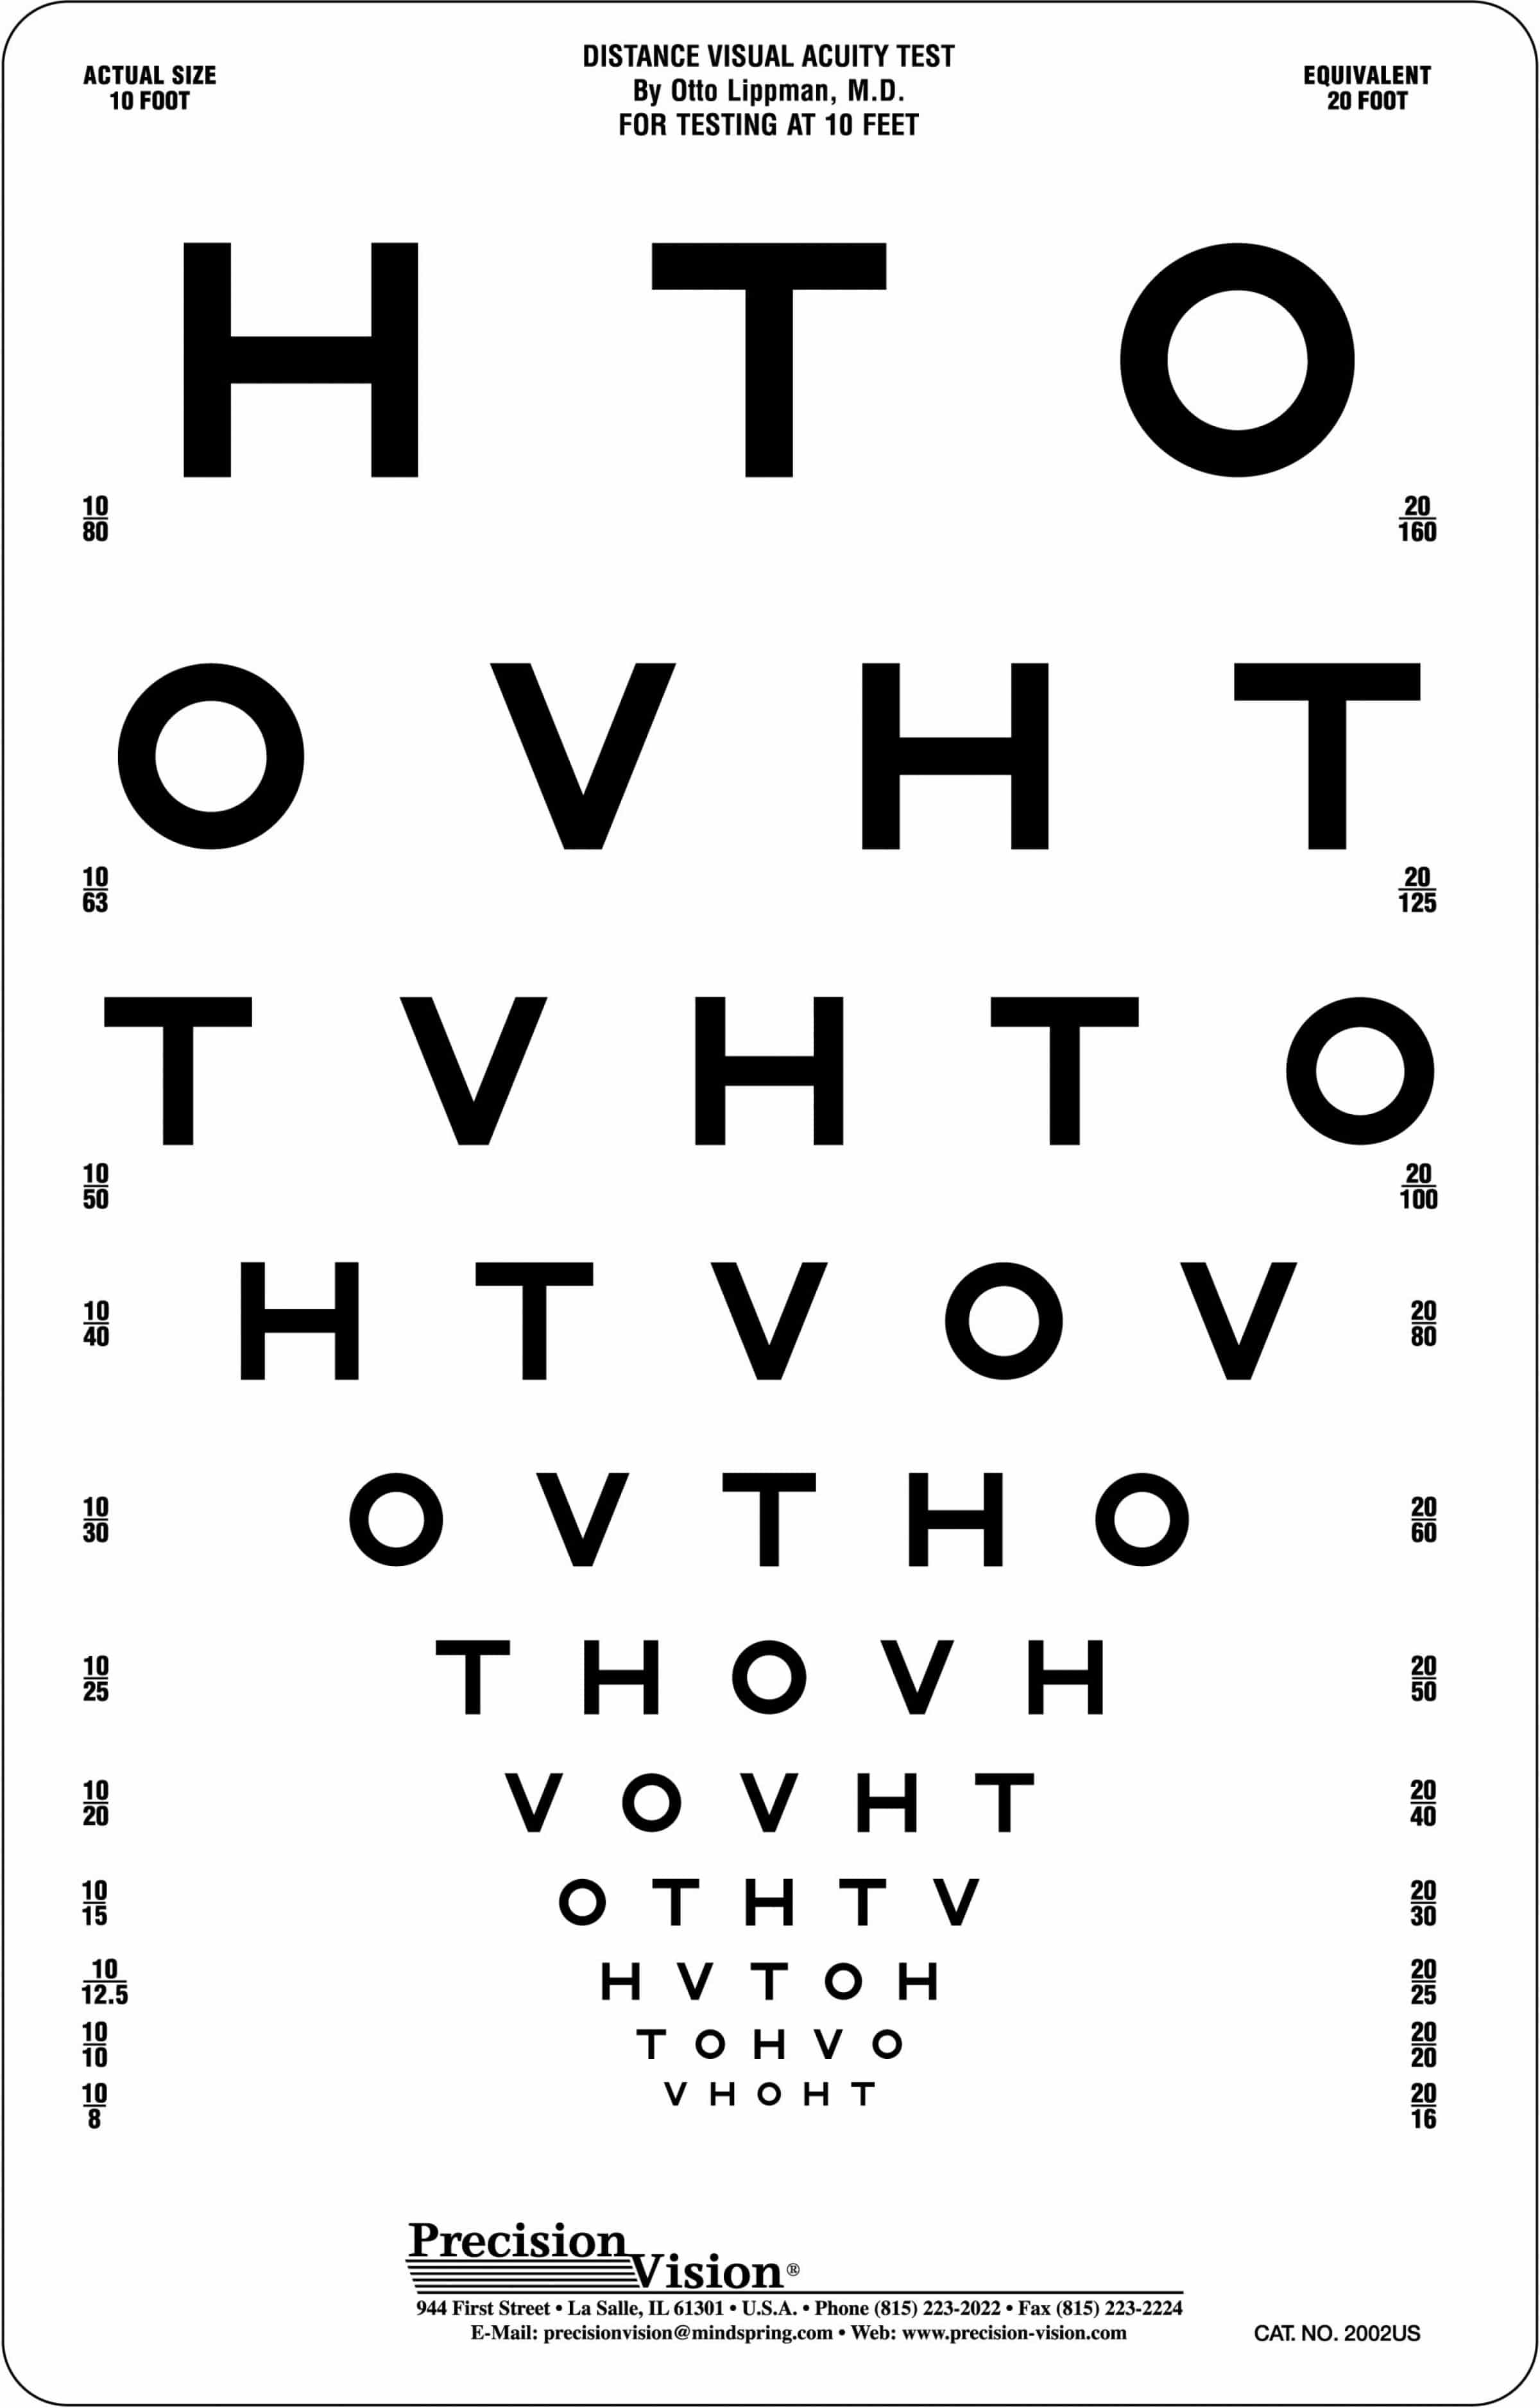 hotv-visual-acuity-chart-10ft-precision-vision